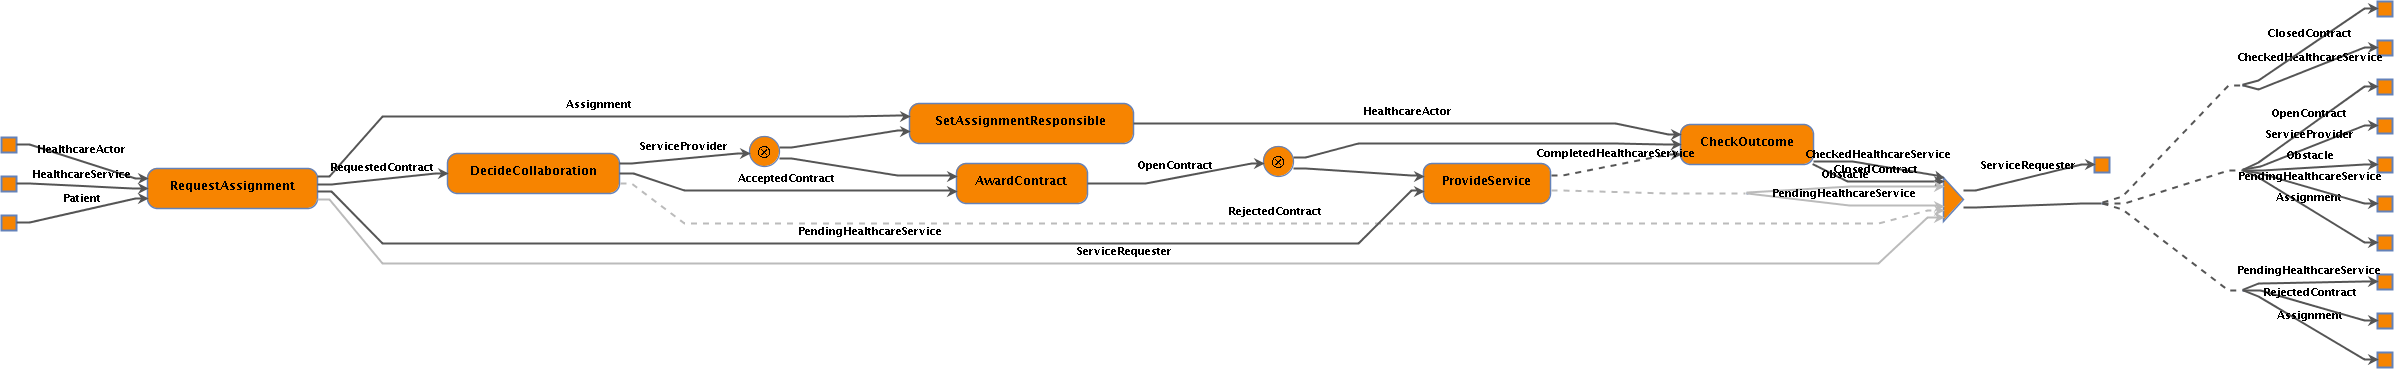 Figure 2: Composed workflow for the assignment pattern